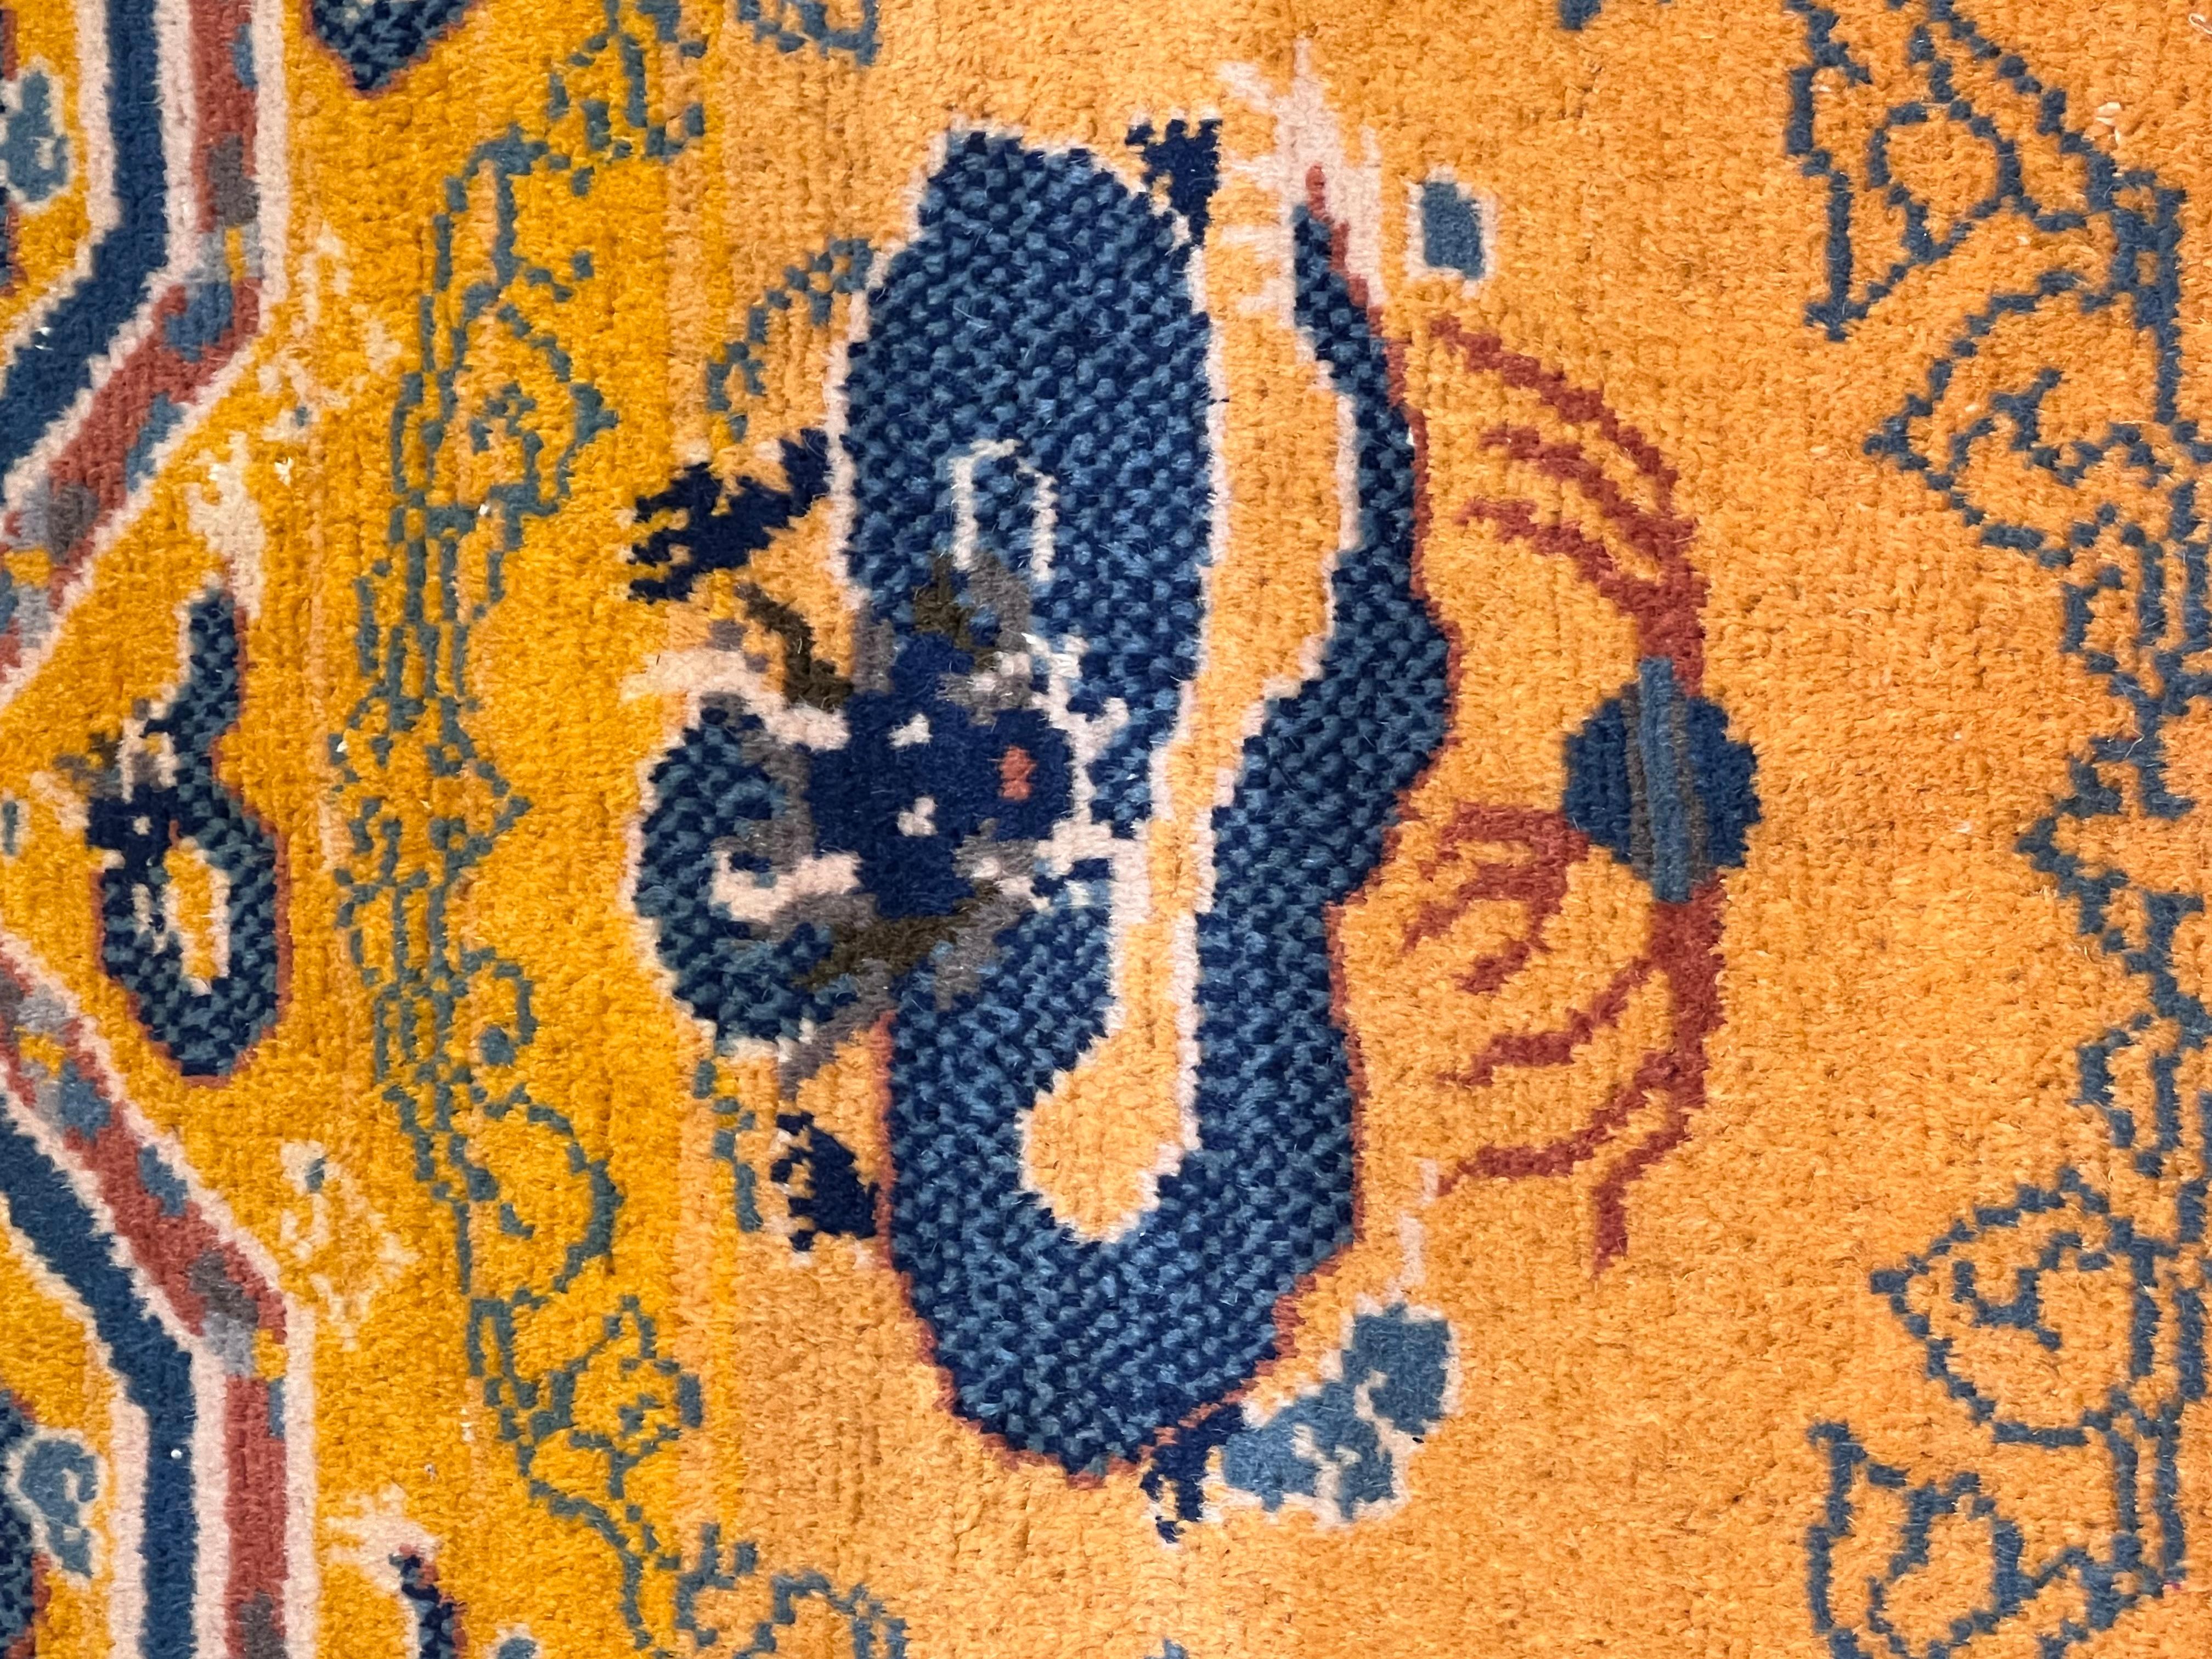 Peculiar and at the same time characteristic is the decoration of this old Chinese carpet with a rare orange background. Main element is the eight-pointed star, used in Buddhist culture as a symbol to represent the entire cosmos.
Eight is